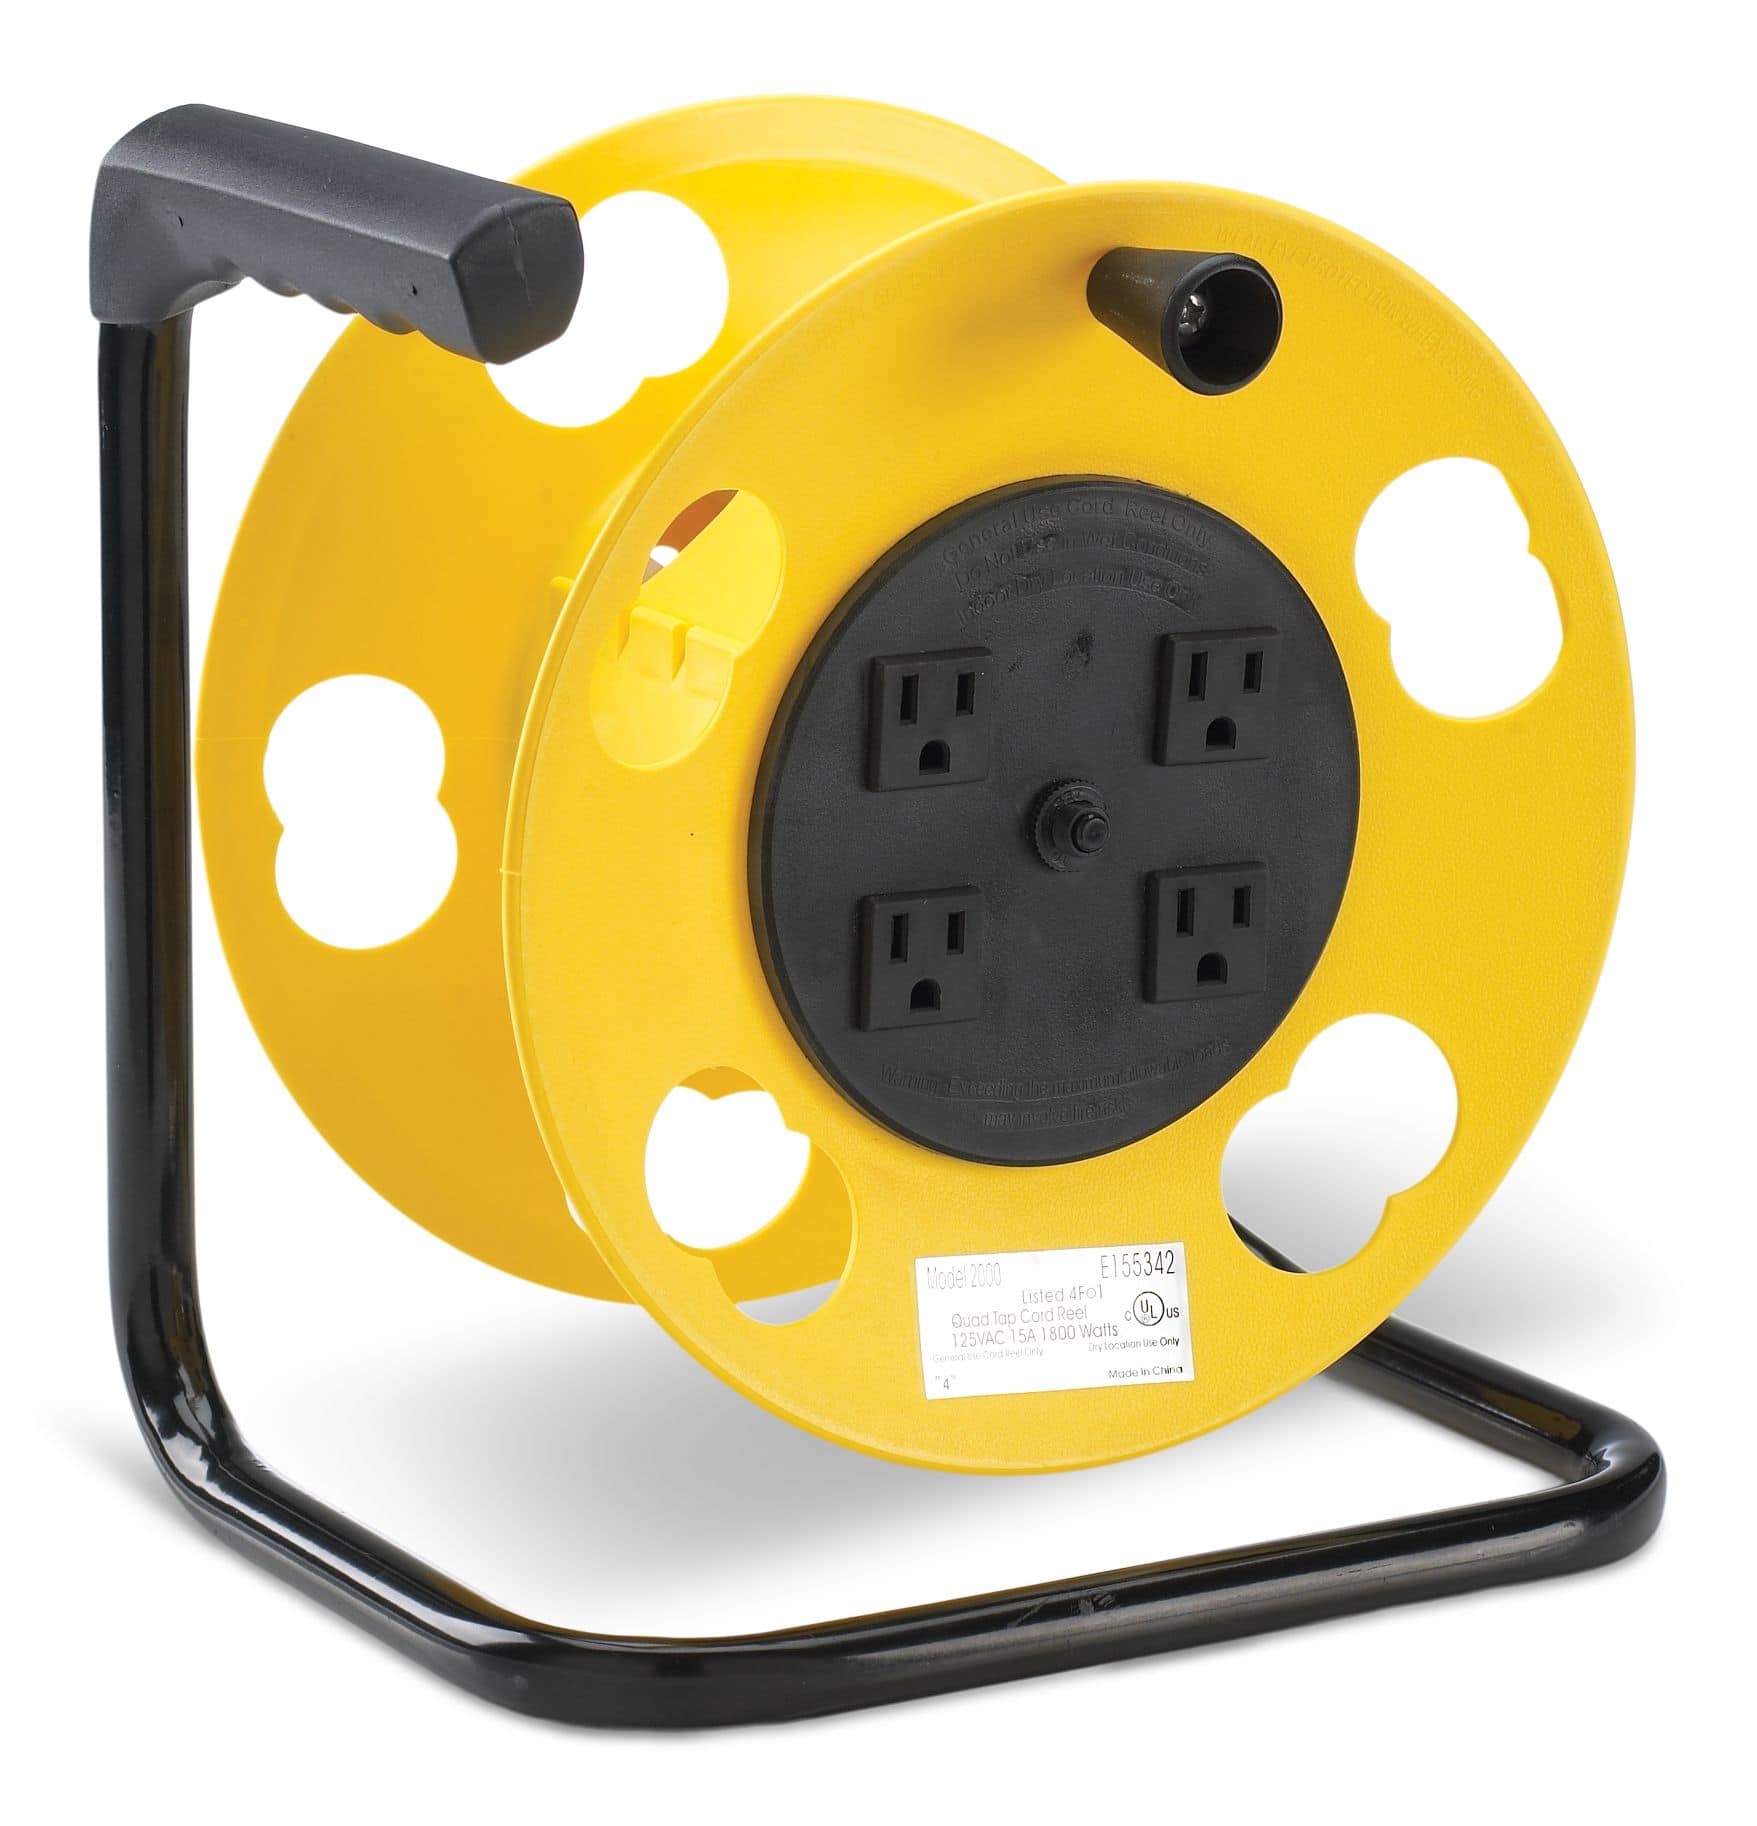 Wall-Mounted Retractable Extension Cord Review and Set Up